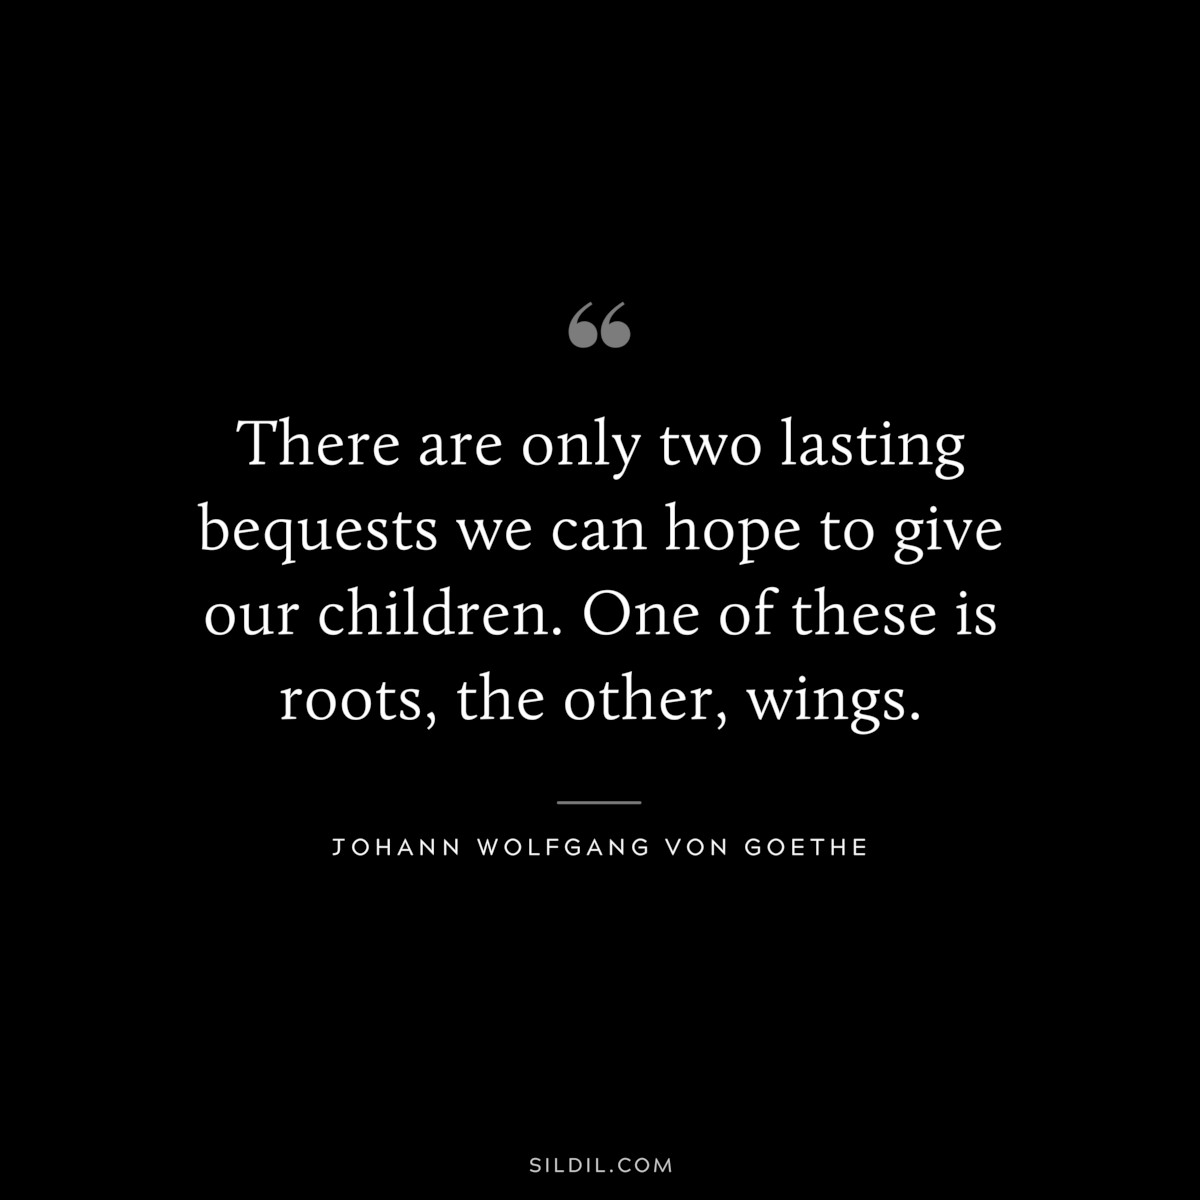 There are only two lasting bequests we can hope to give our children. One of these is roots, the other, wings.― Johann Wolfgang von Goethe